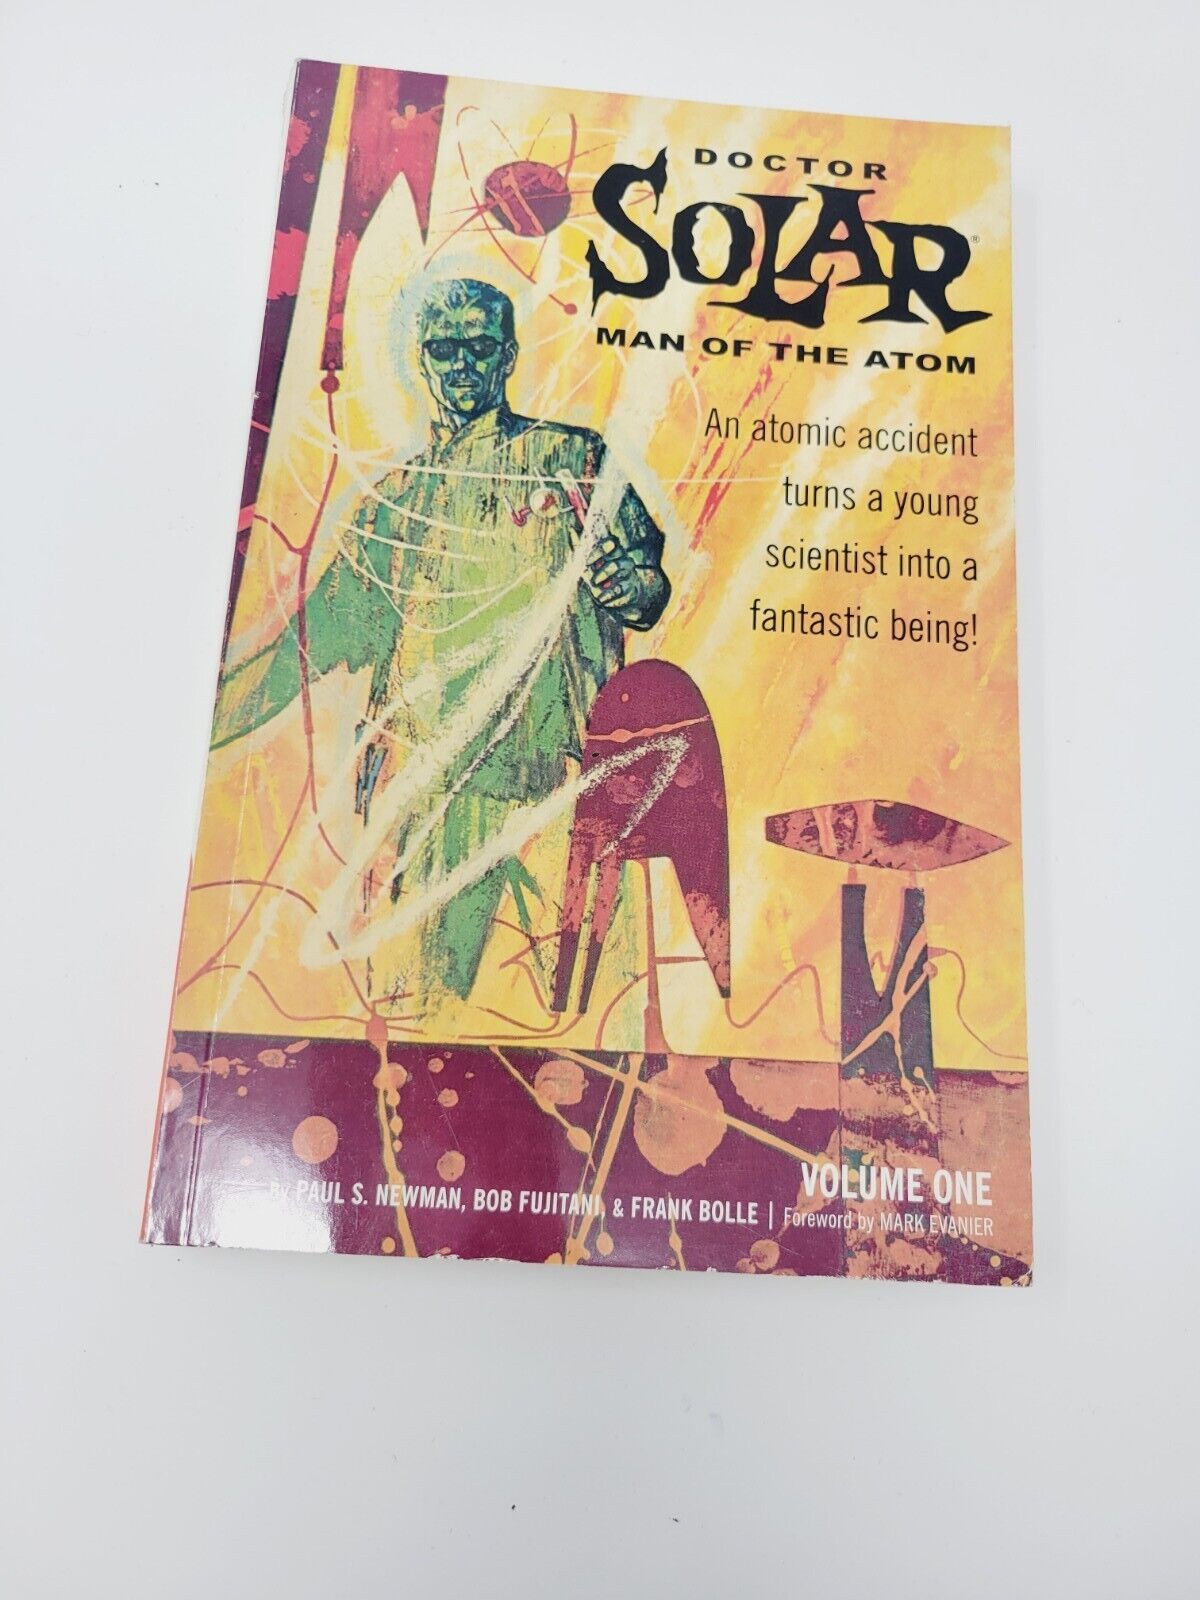 Doctor Solar: Man of the Atom Vol. 1 (Paperback) Used